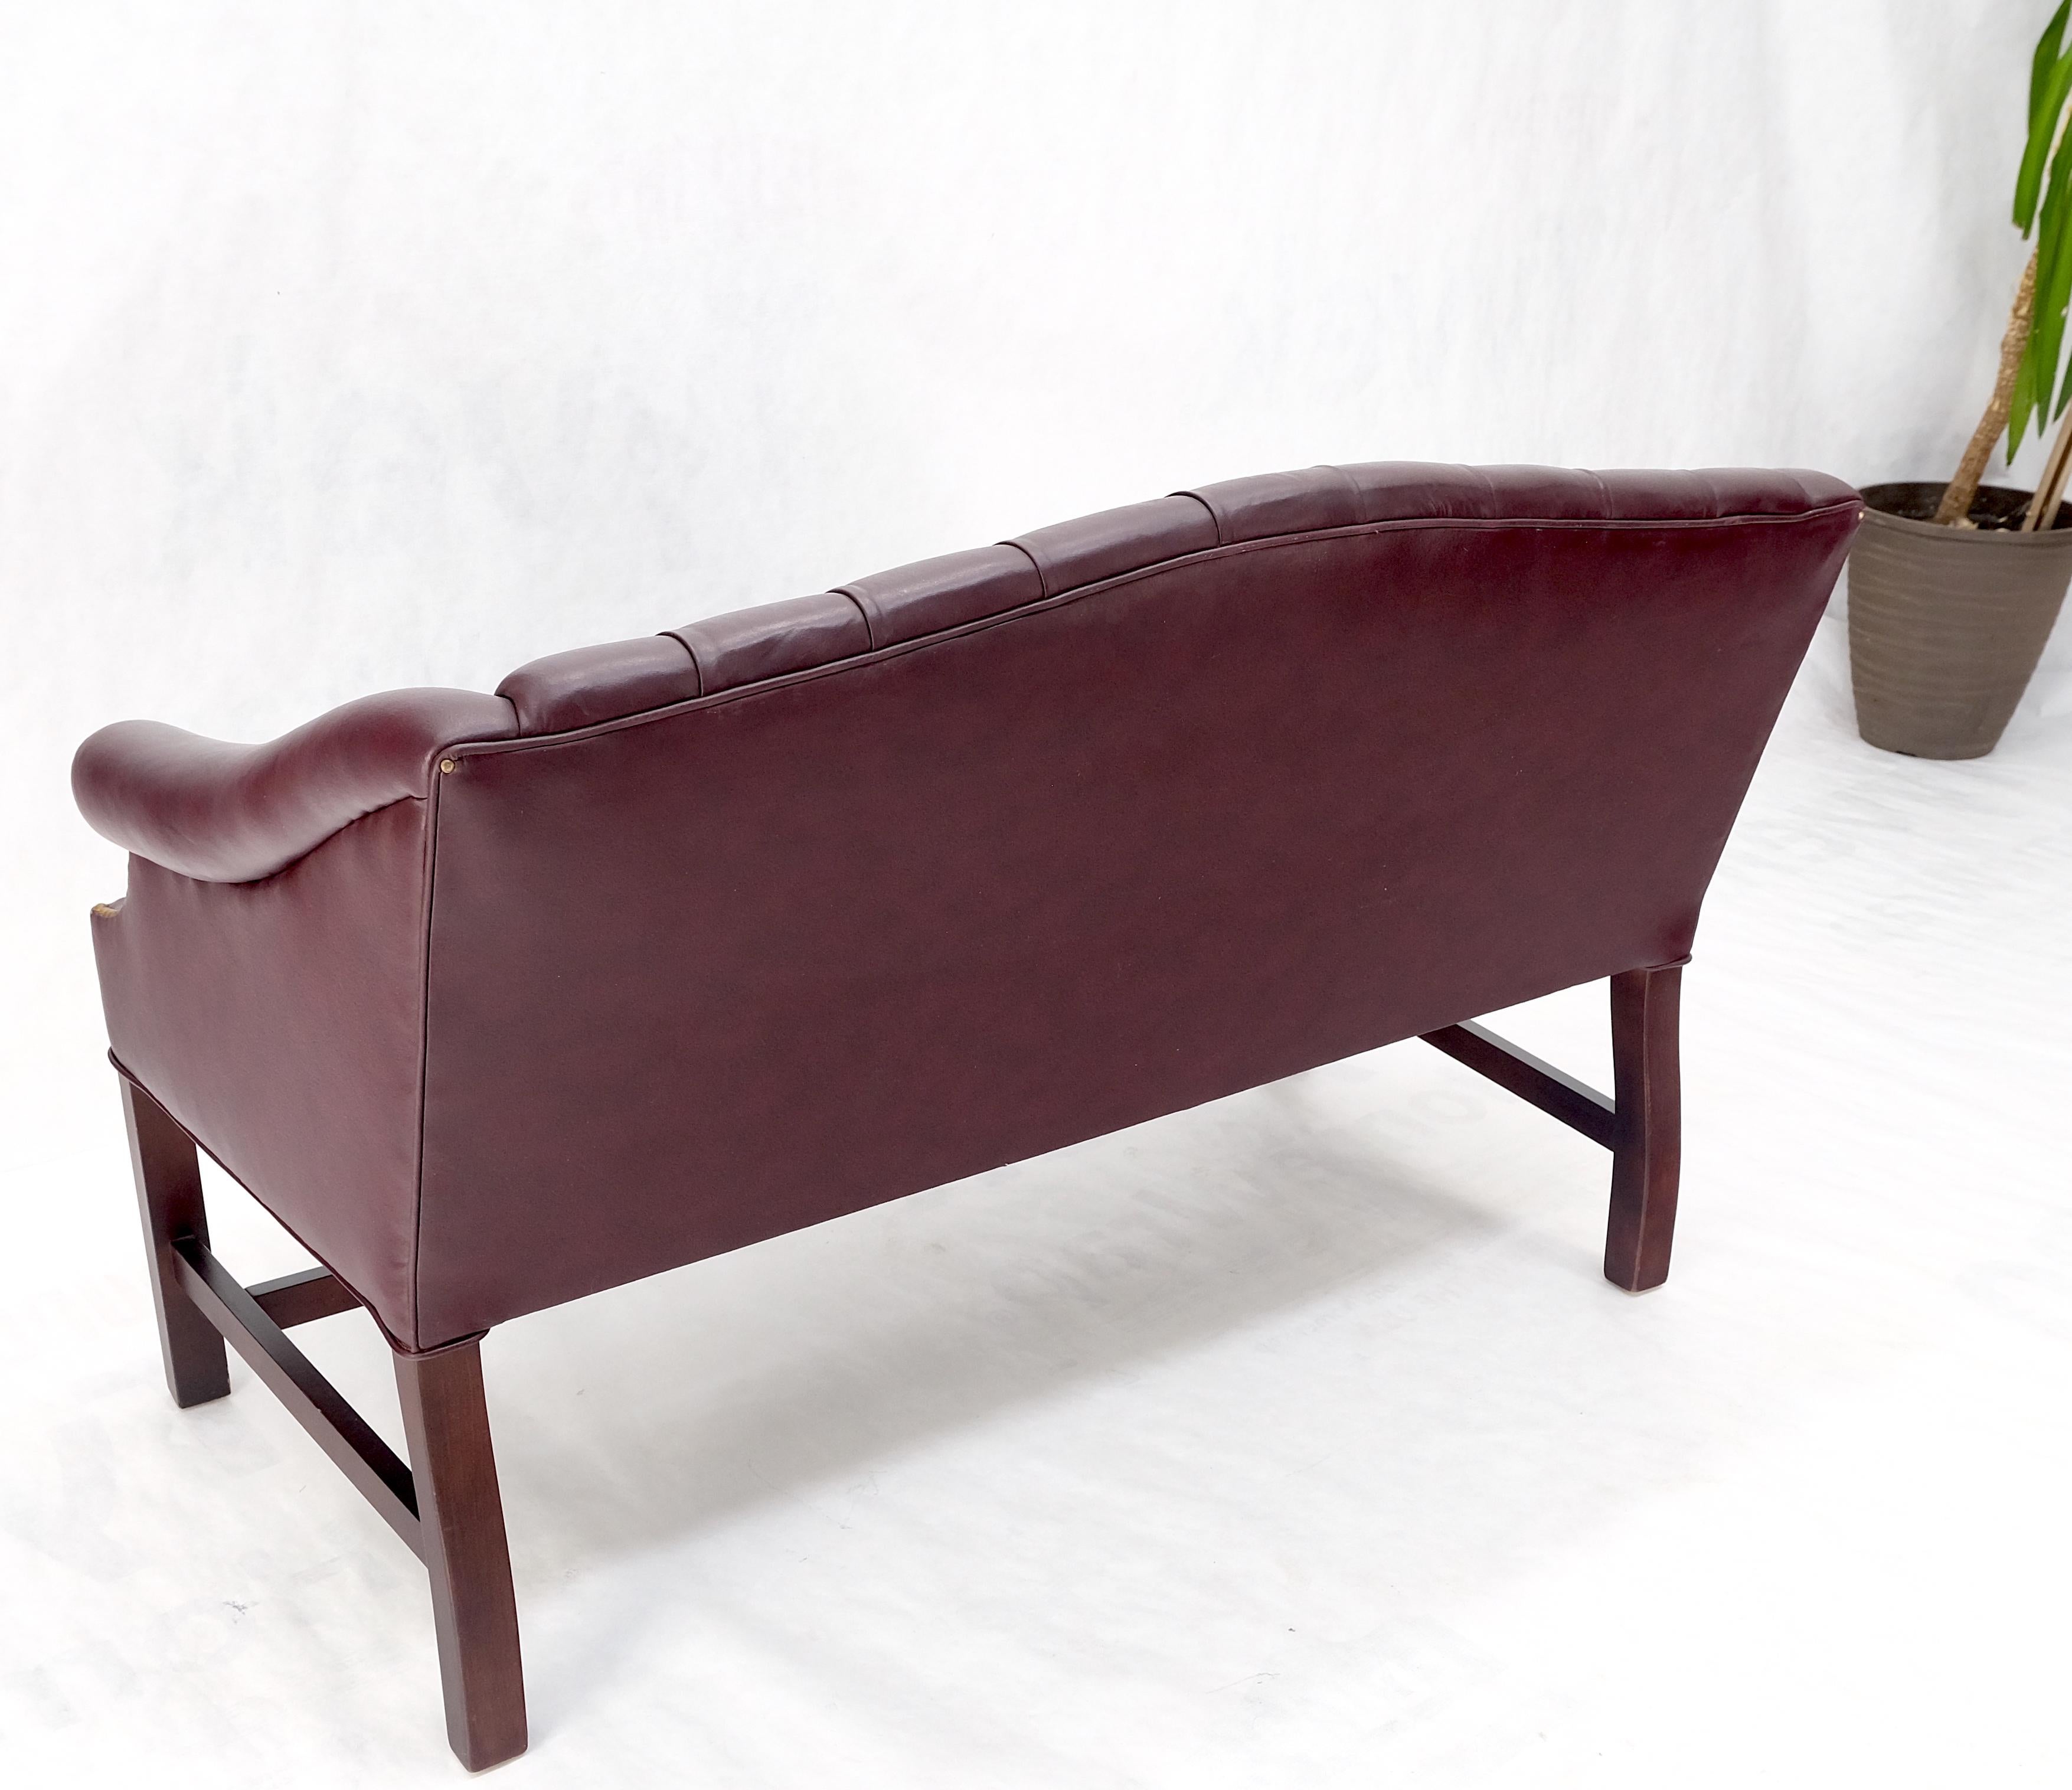 Tufted Burgundy Leather Federal Style Settee Love Seat Couch Sofa MINT! For Sale 8